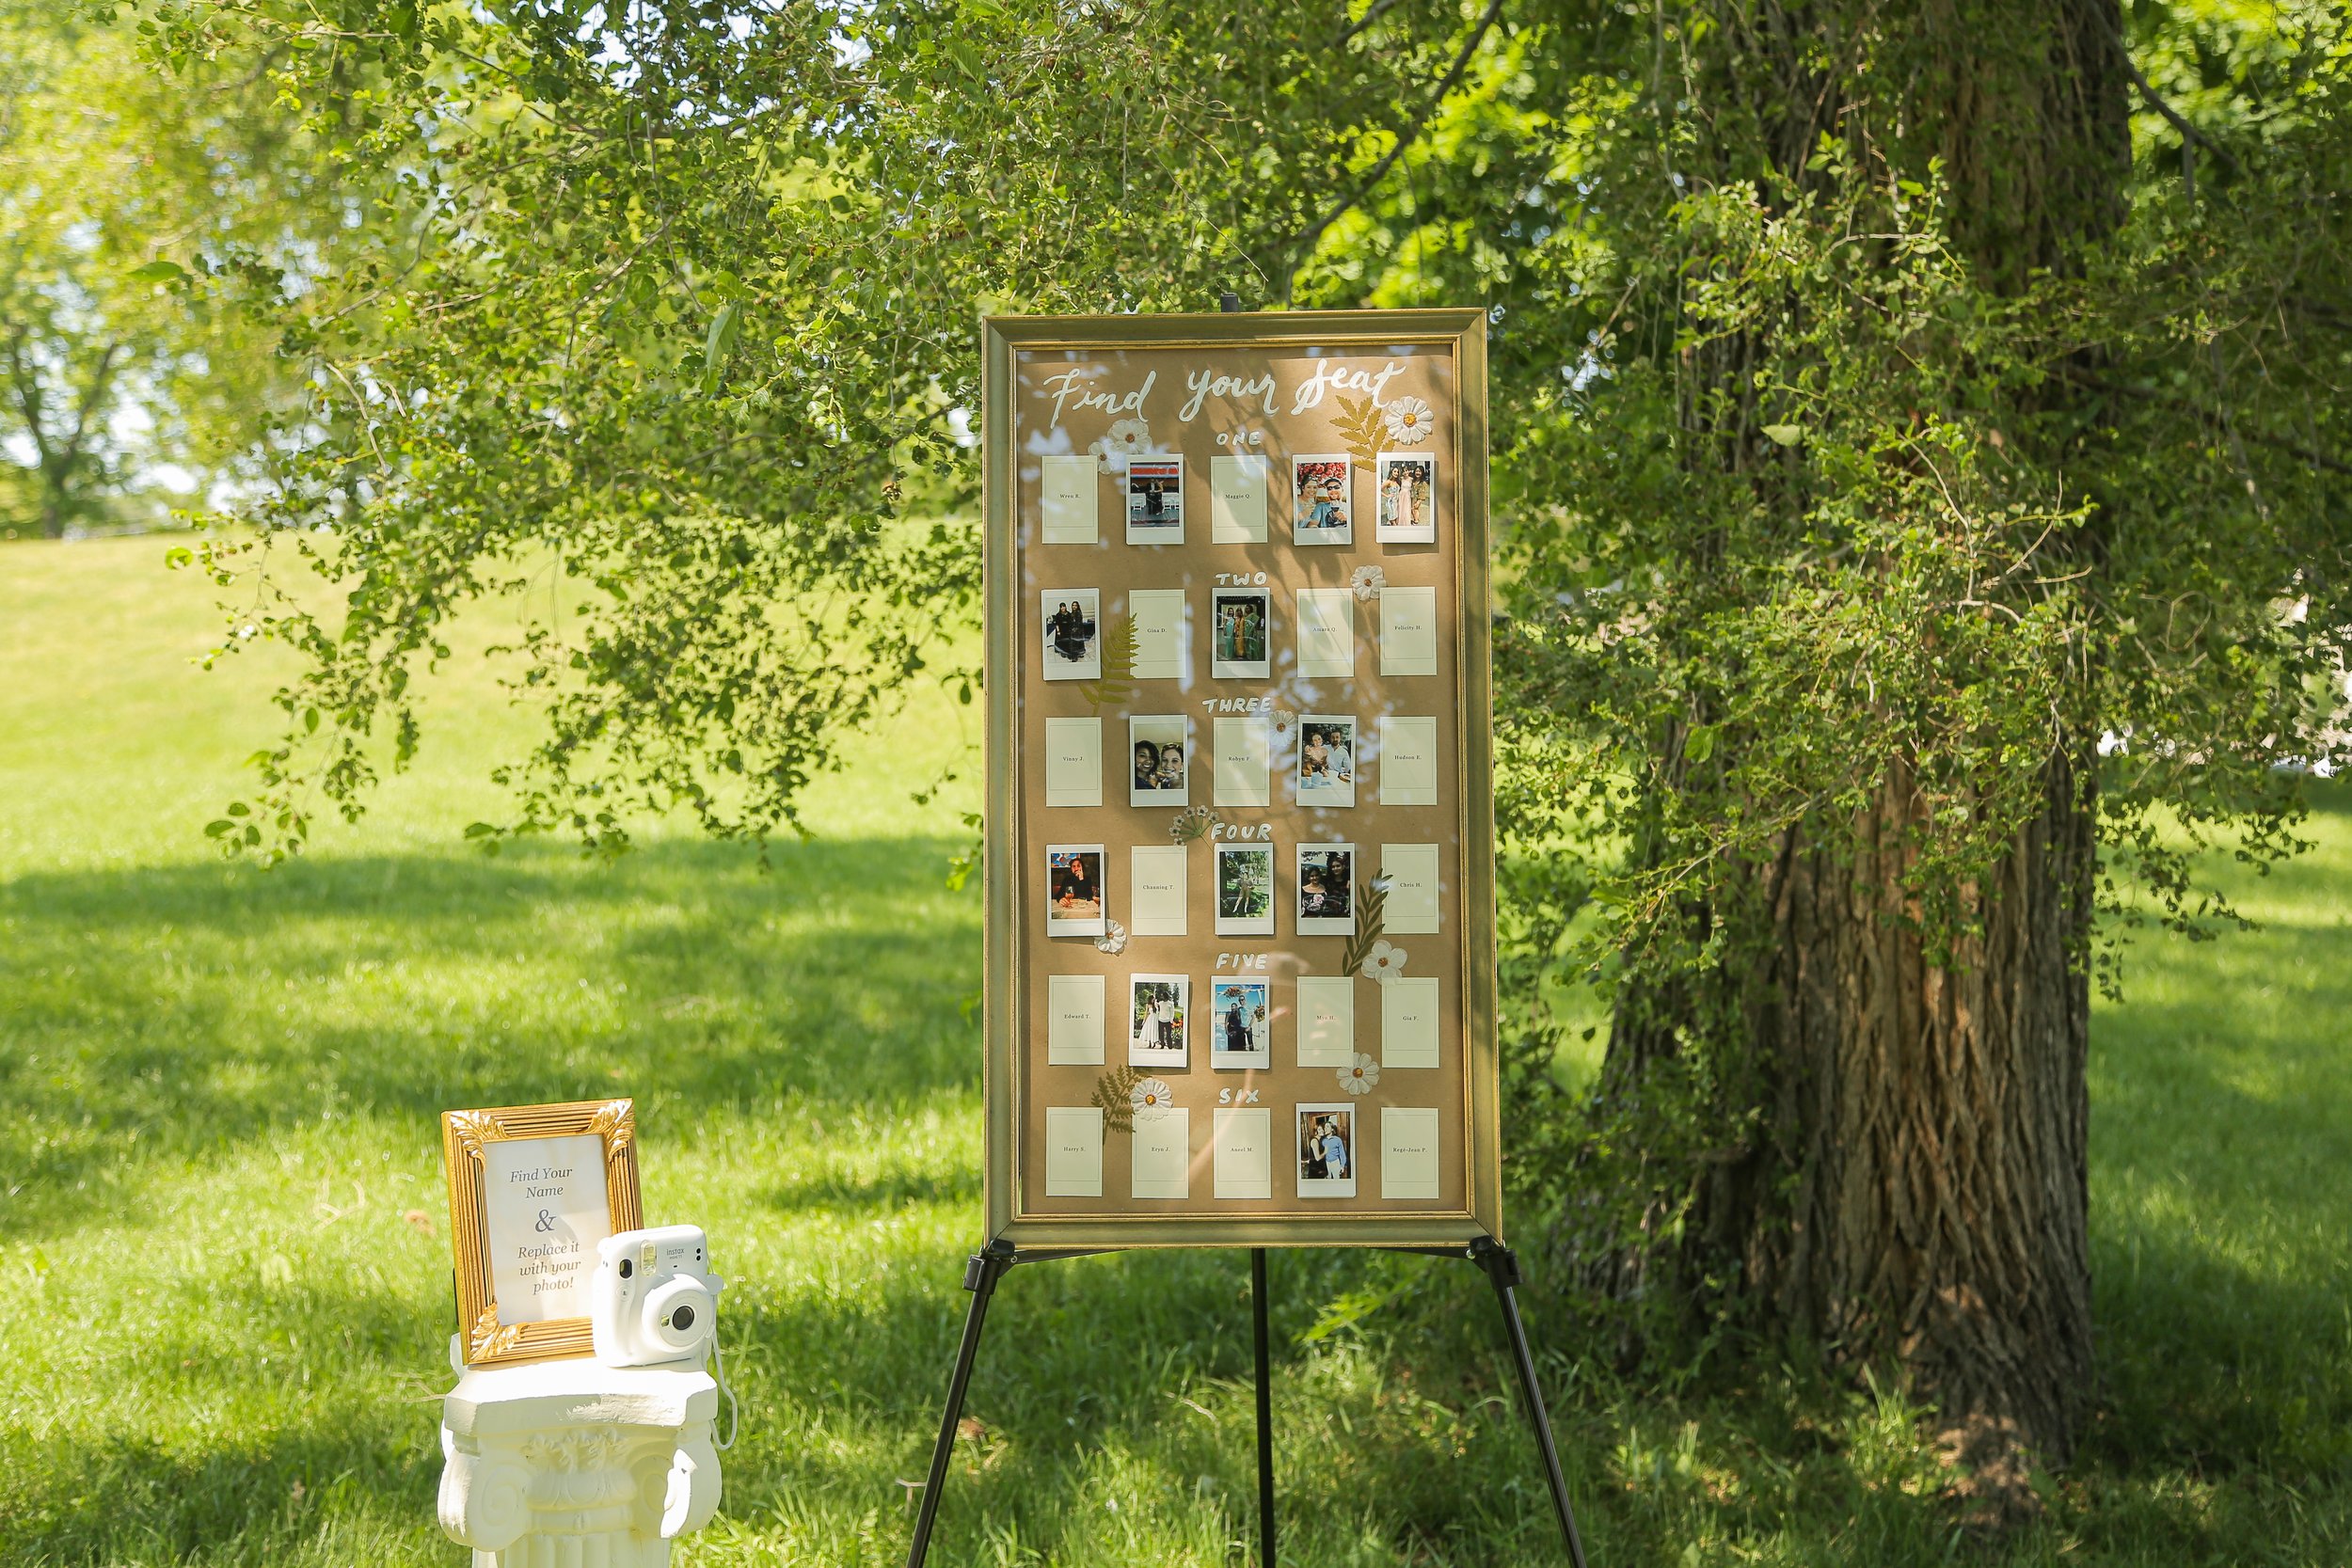 15 Gorgeous Wedding Seating Chart Designs for Your Big Day